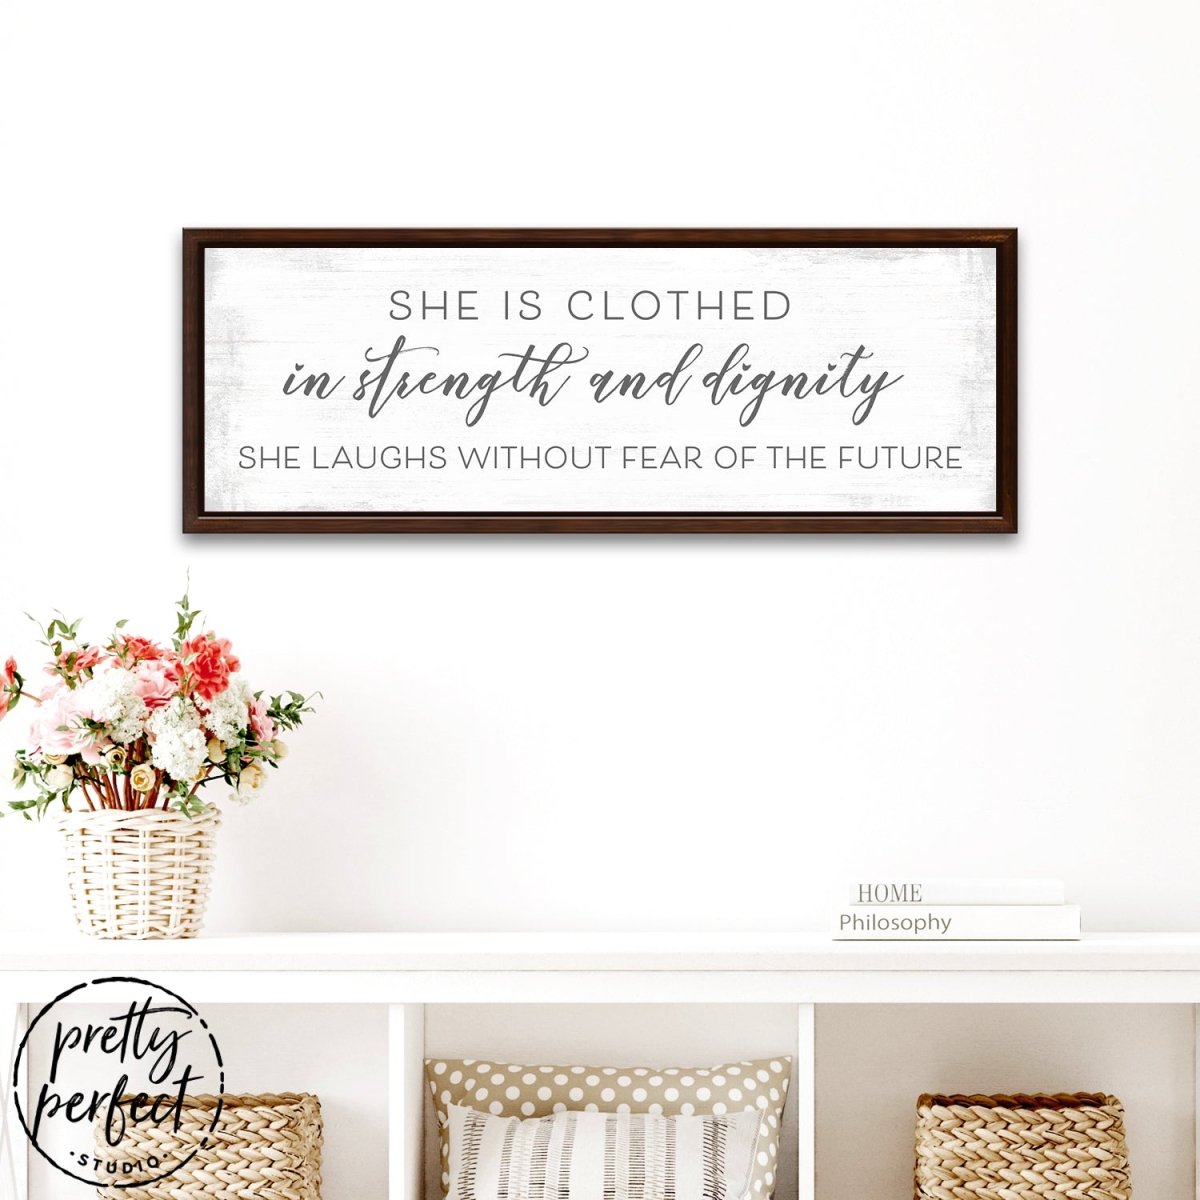 She Is Clothed In Strength and Dignity Sign Above Table - Pretty Perfect Studio